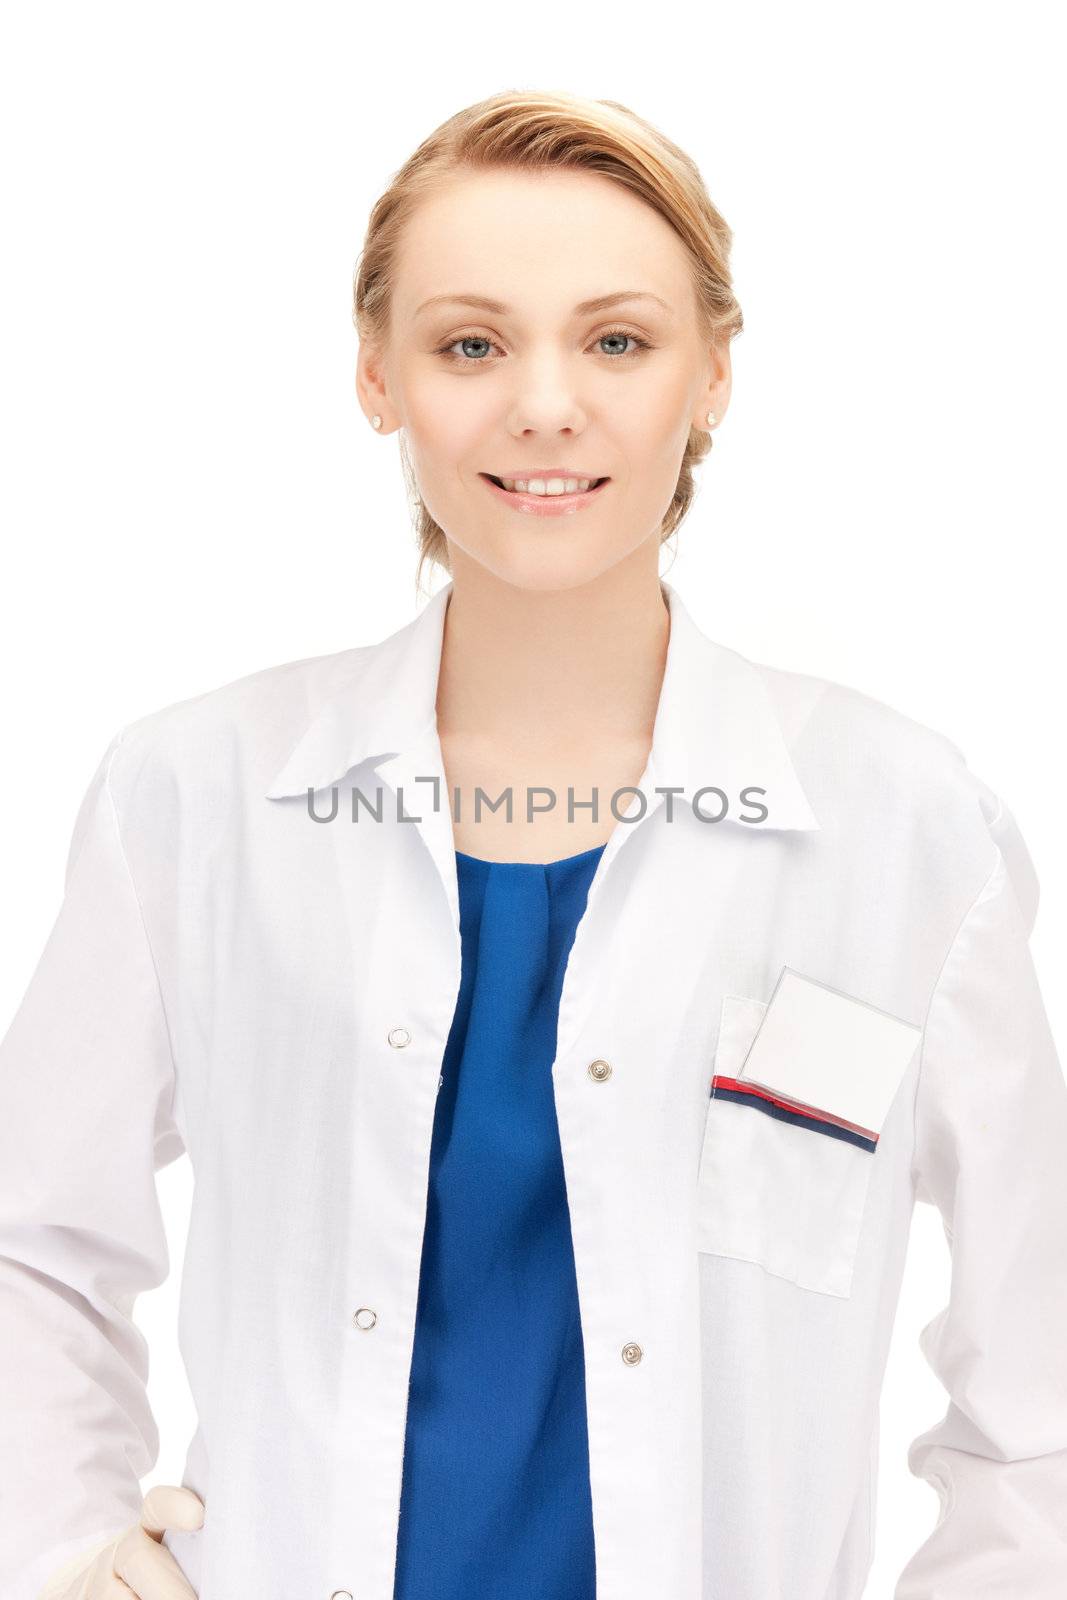 bright picture of an attractive female doctor